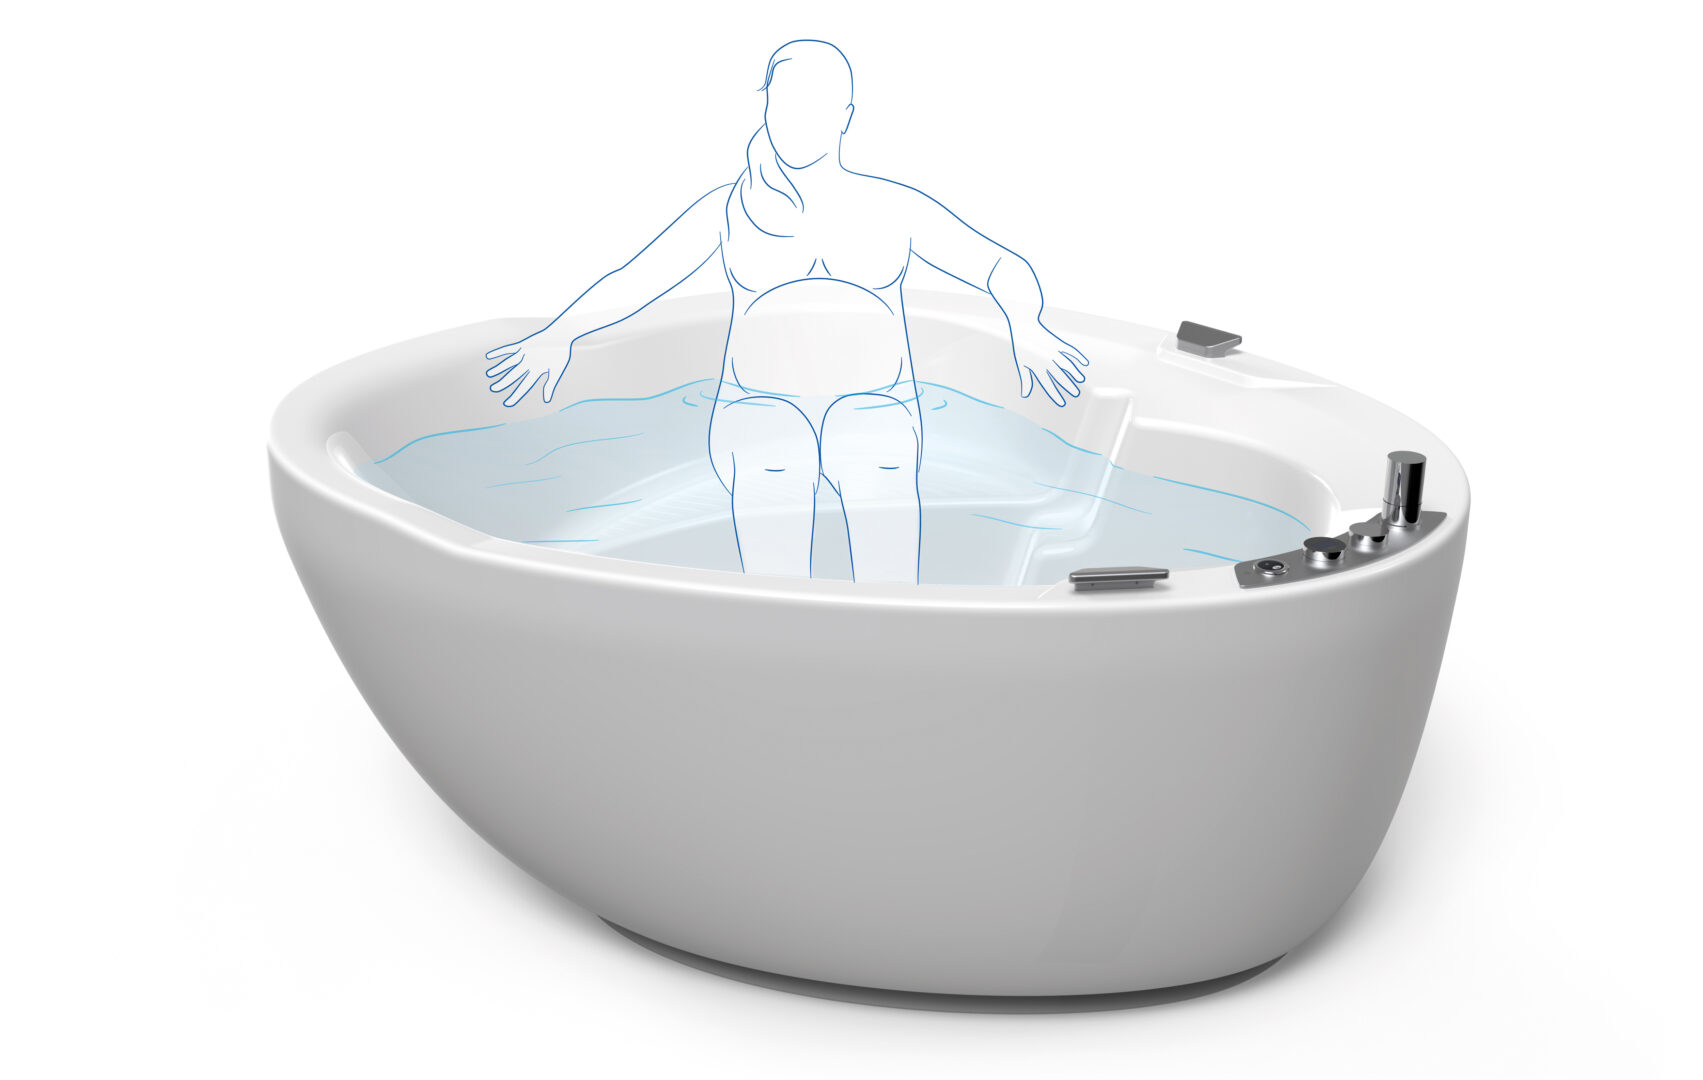 Birth Pool Cleaning and Disinfecting Guidelines – Pregnancy Birth